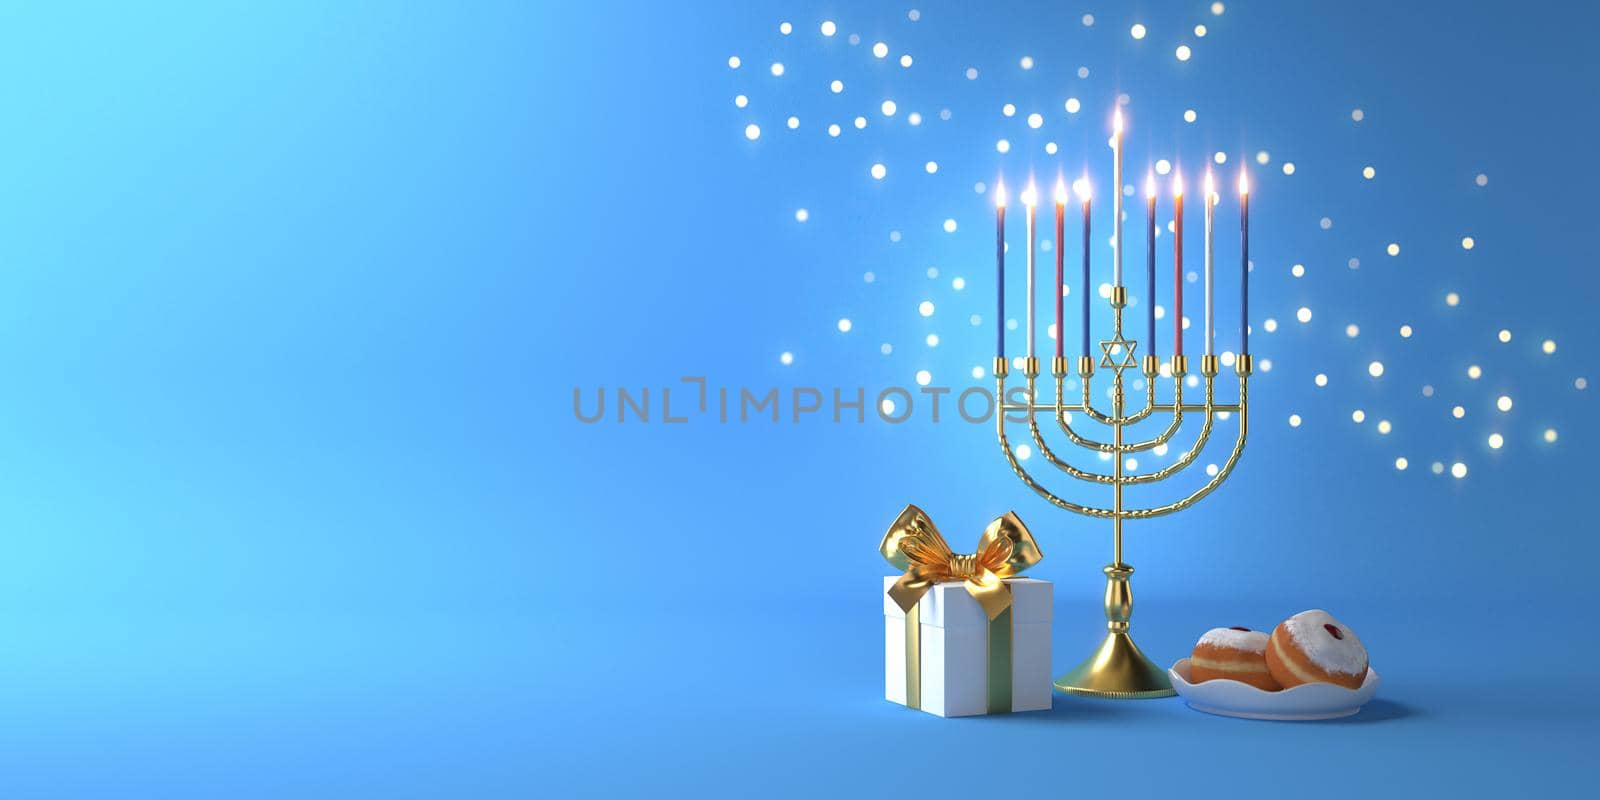 3d rendering Image of Jewish holiday Hanukkah with menorah or traditional Candelabra,gif box, doughnut on a  blue background. by put3d